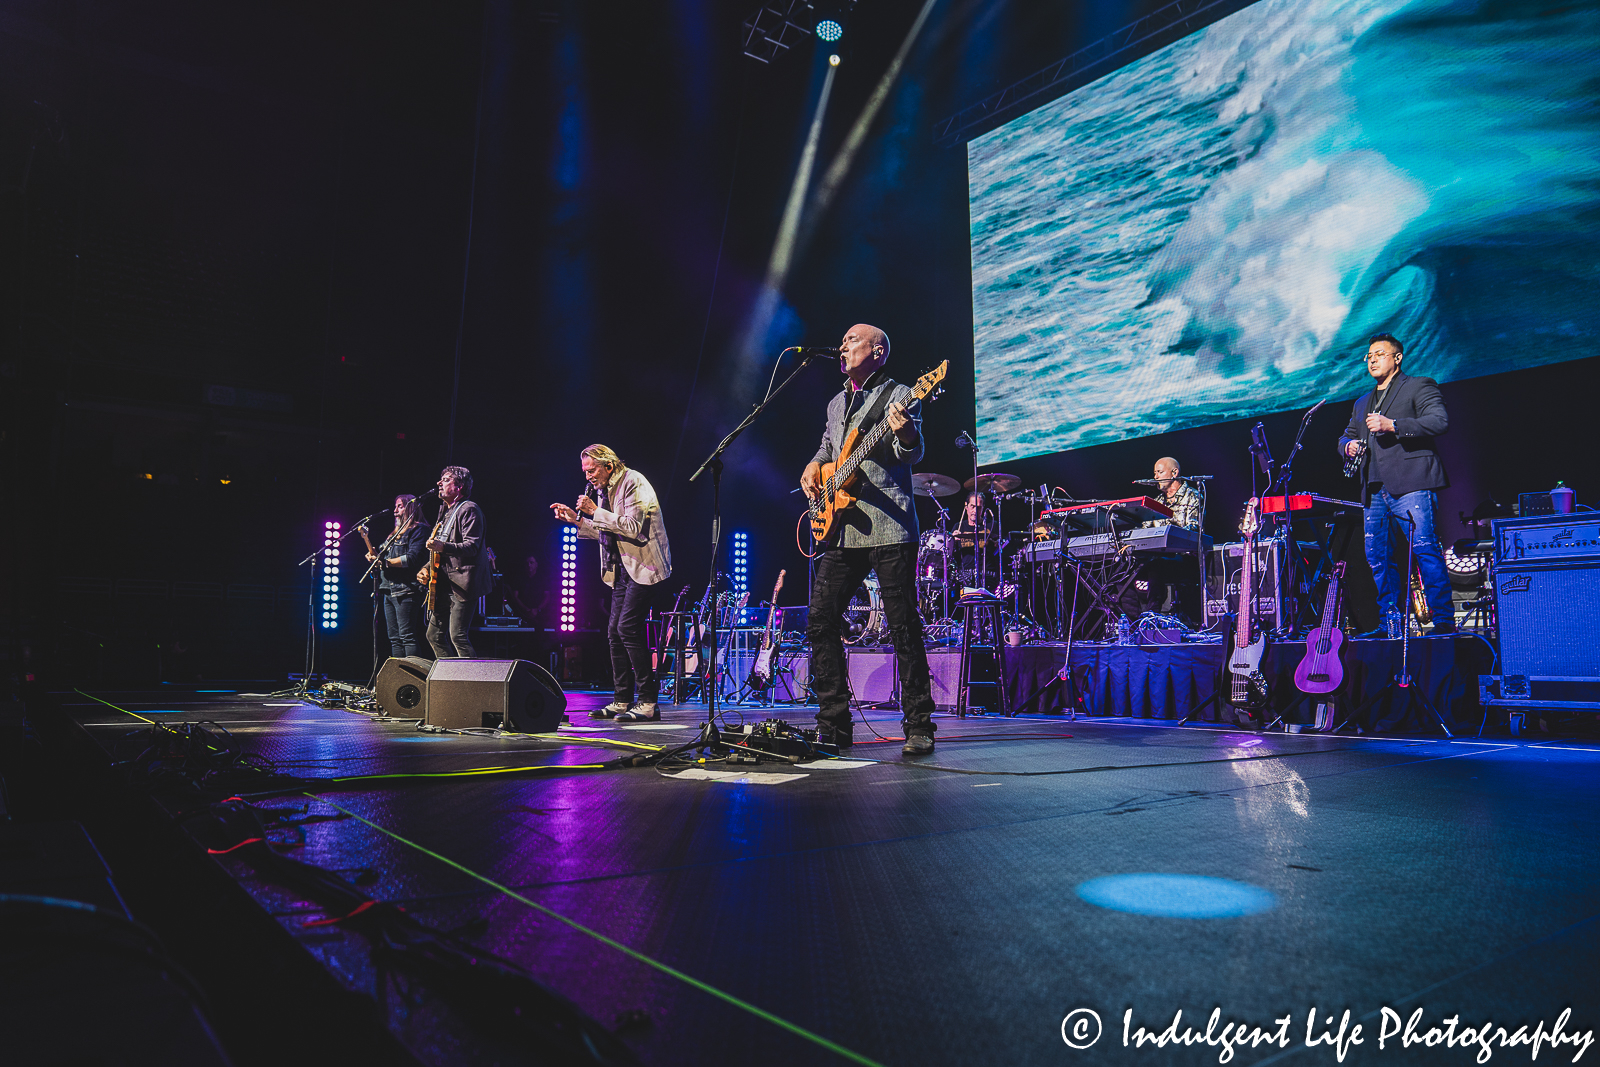 Kenny Loggins and his band performing "This Is It" live in concert at The Family Arena in St. Charles, MO during his farewell tour stop on August 17, 2023.